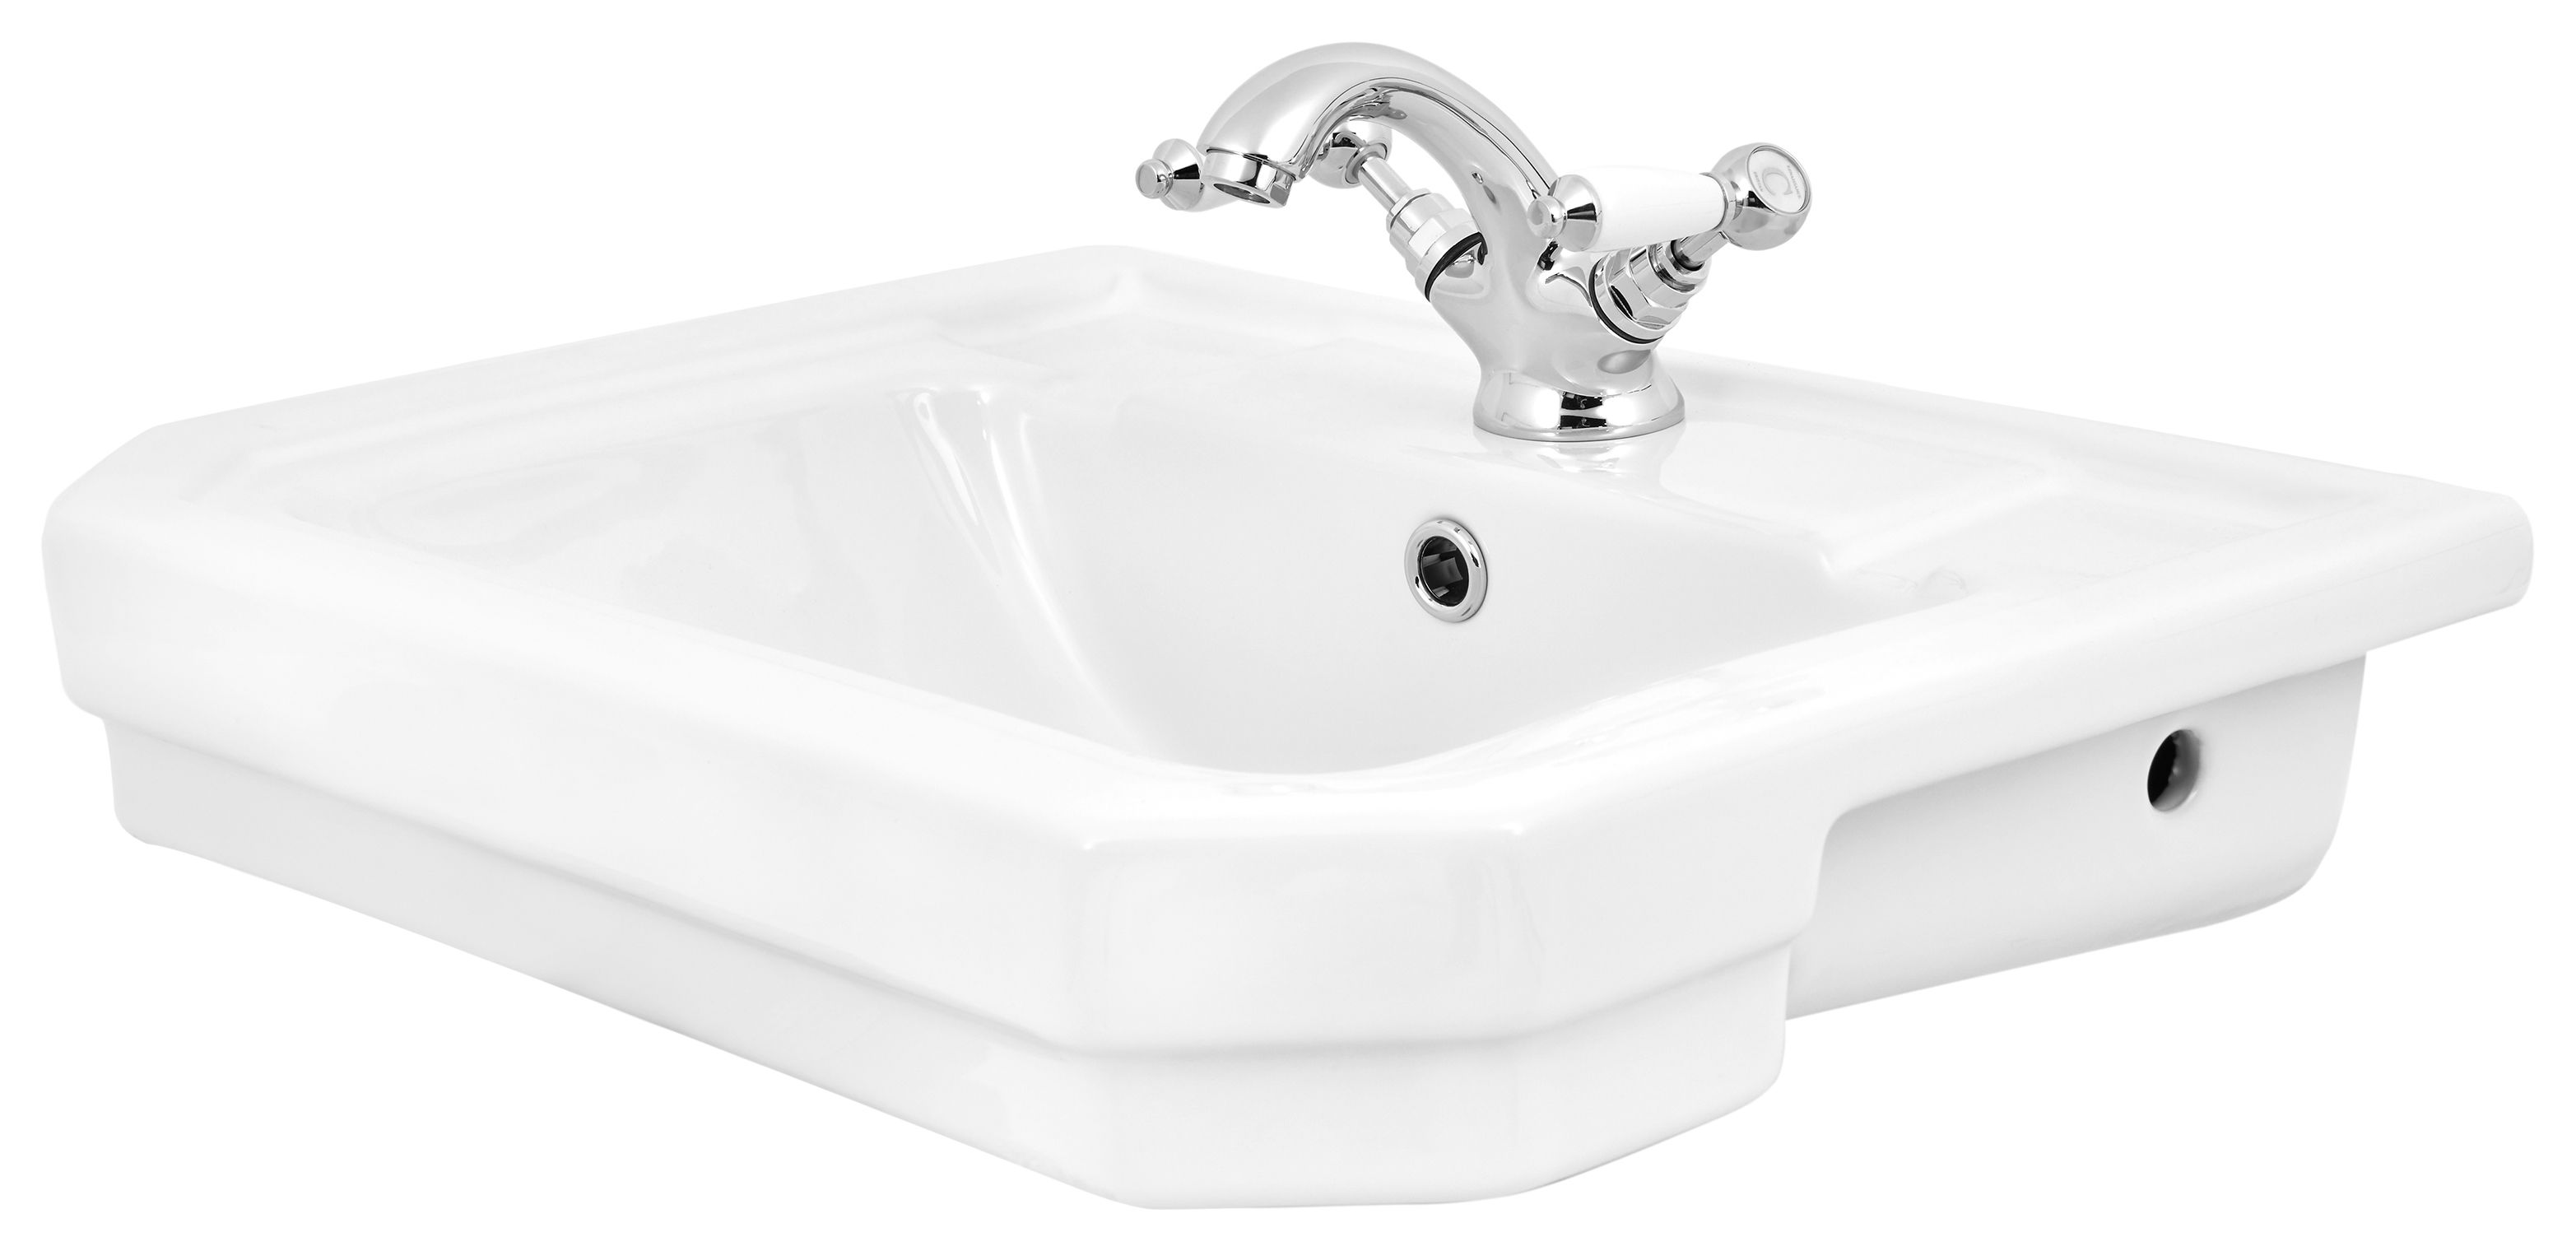 Image of Wickes Oxford Traditional 1 Tap Hole Semi Recessed Bathroom Basin - 550mm